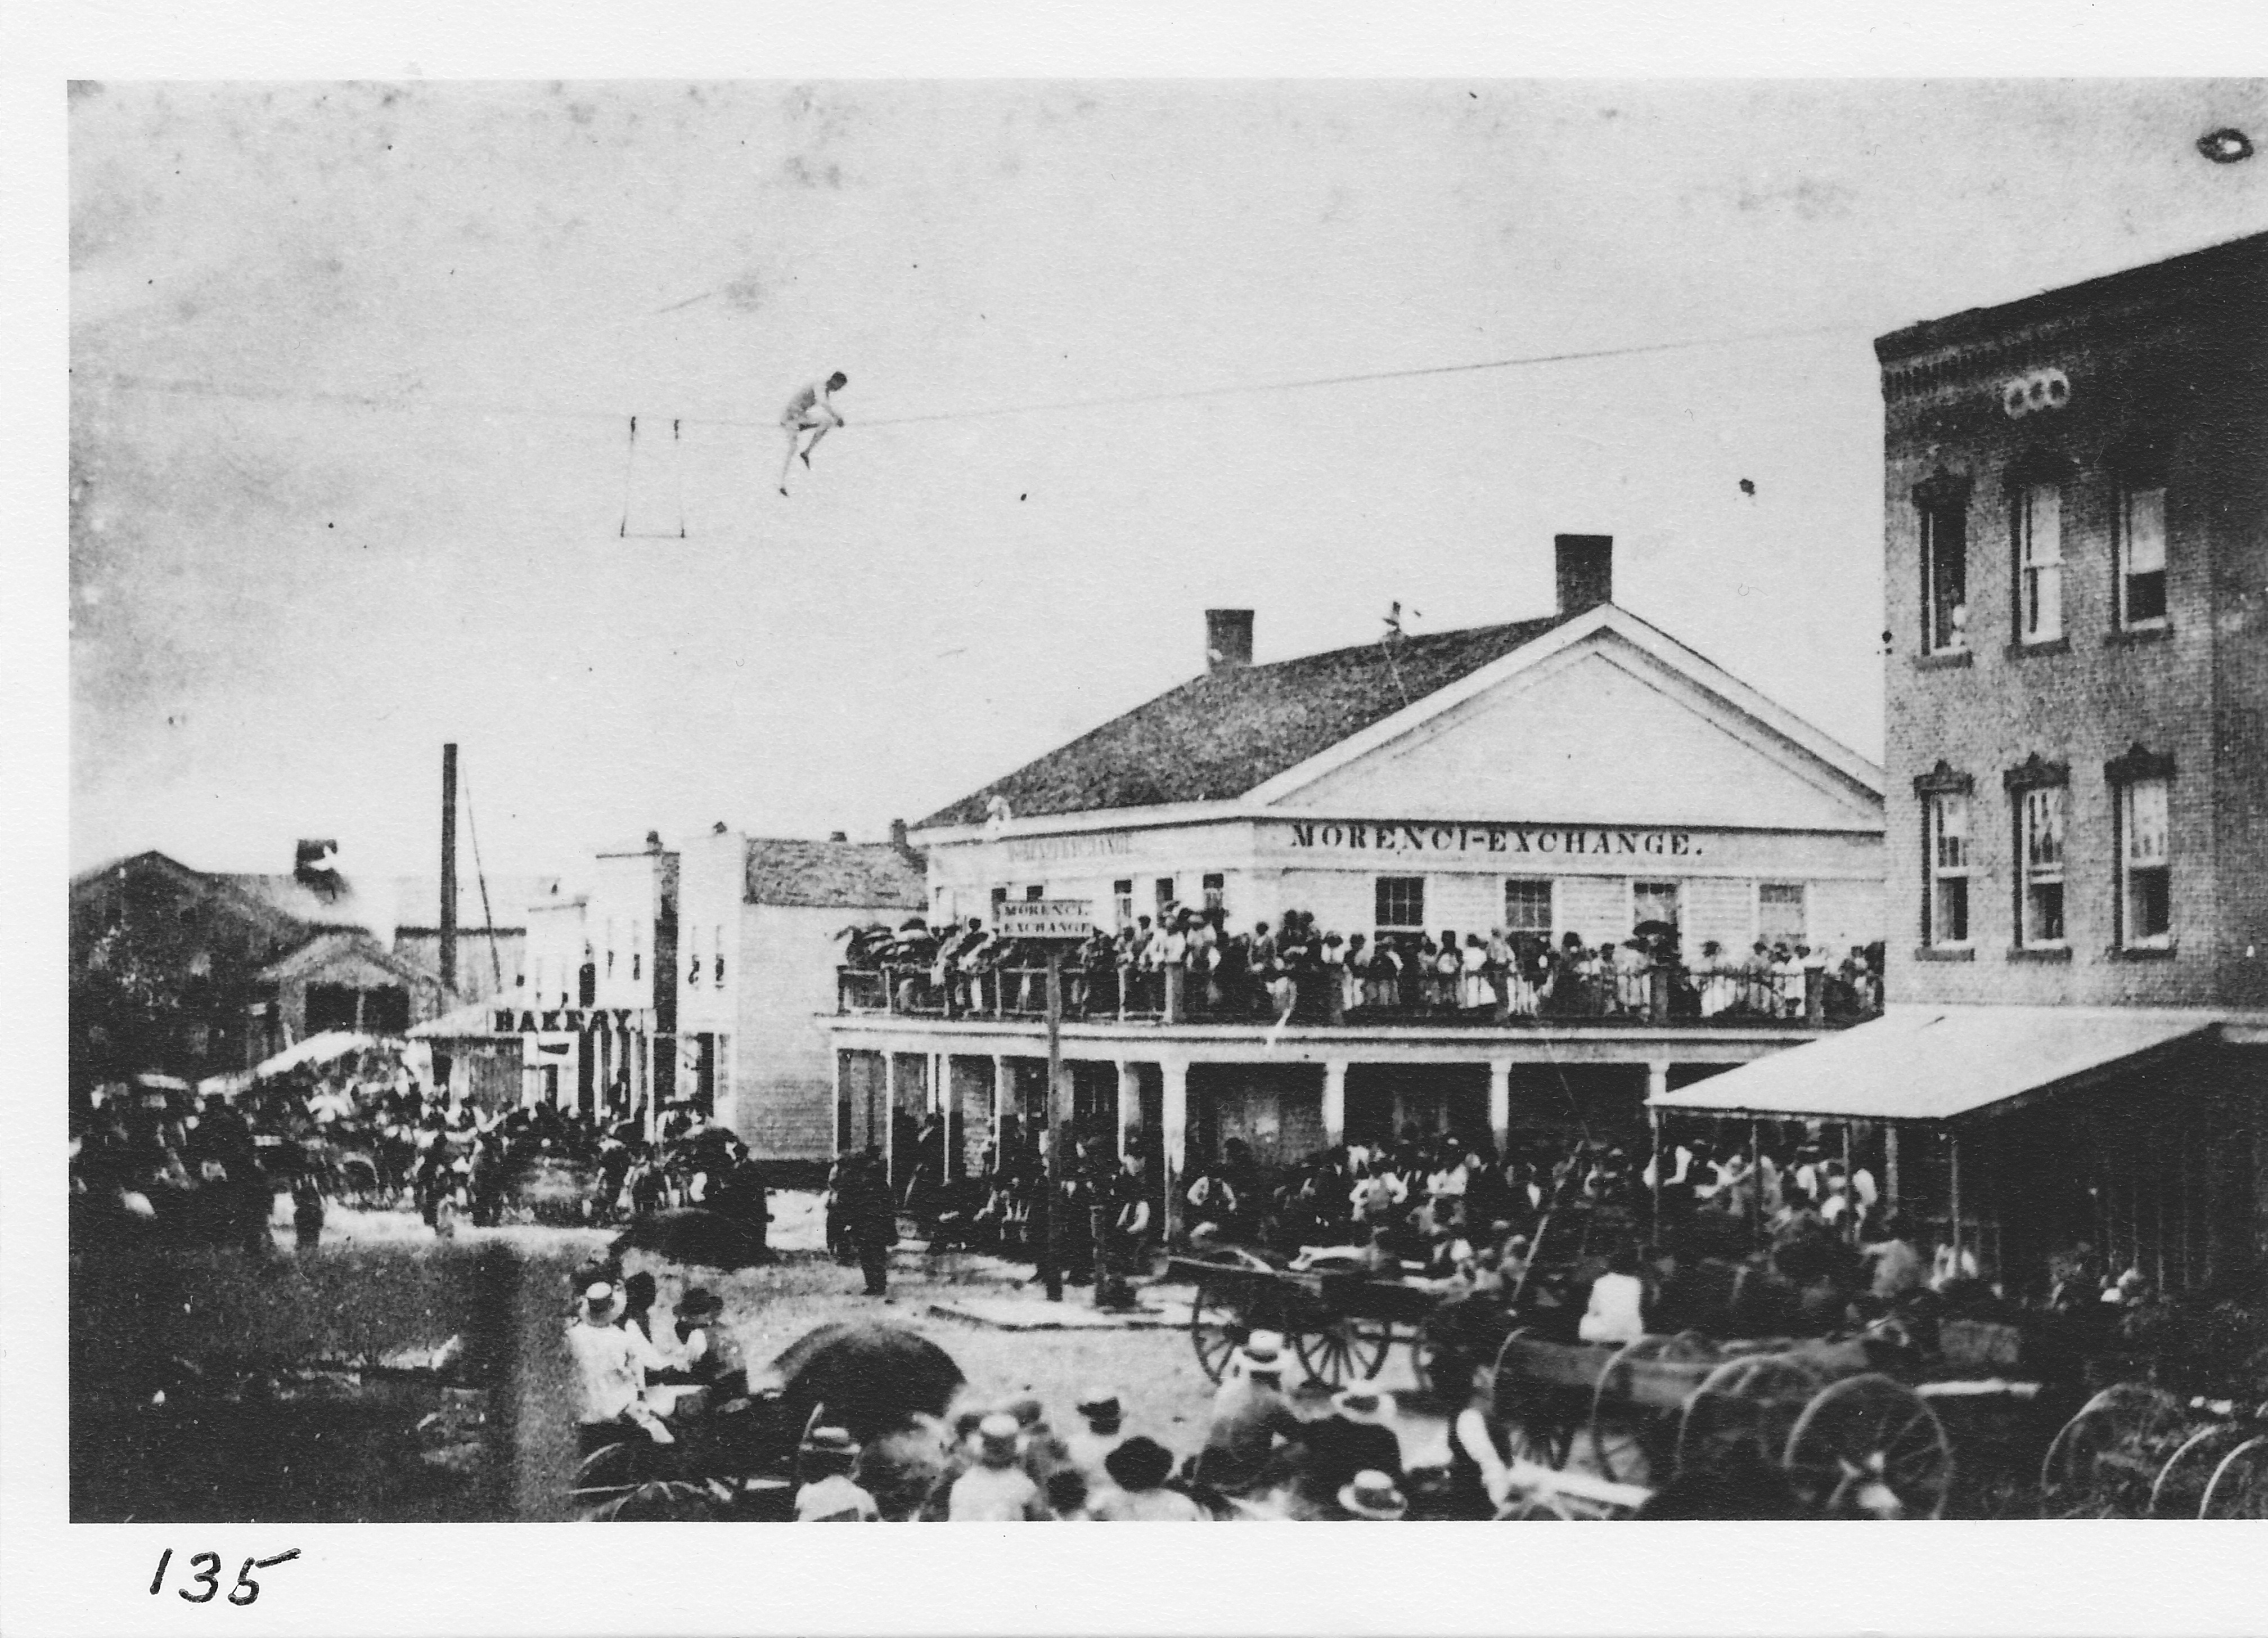 Morenci Centennial celebration July 4, 1876.  Abram Babcock is walking a tight-wire from the bank to the Mace building.  Morenci Exchange is on northwest corner.